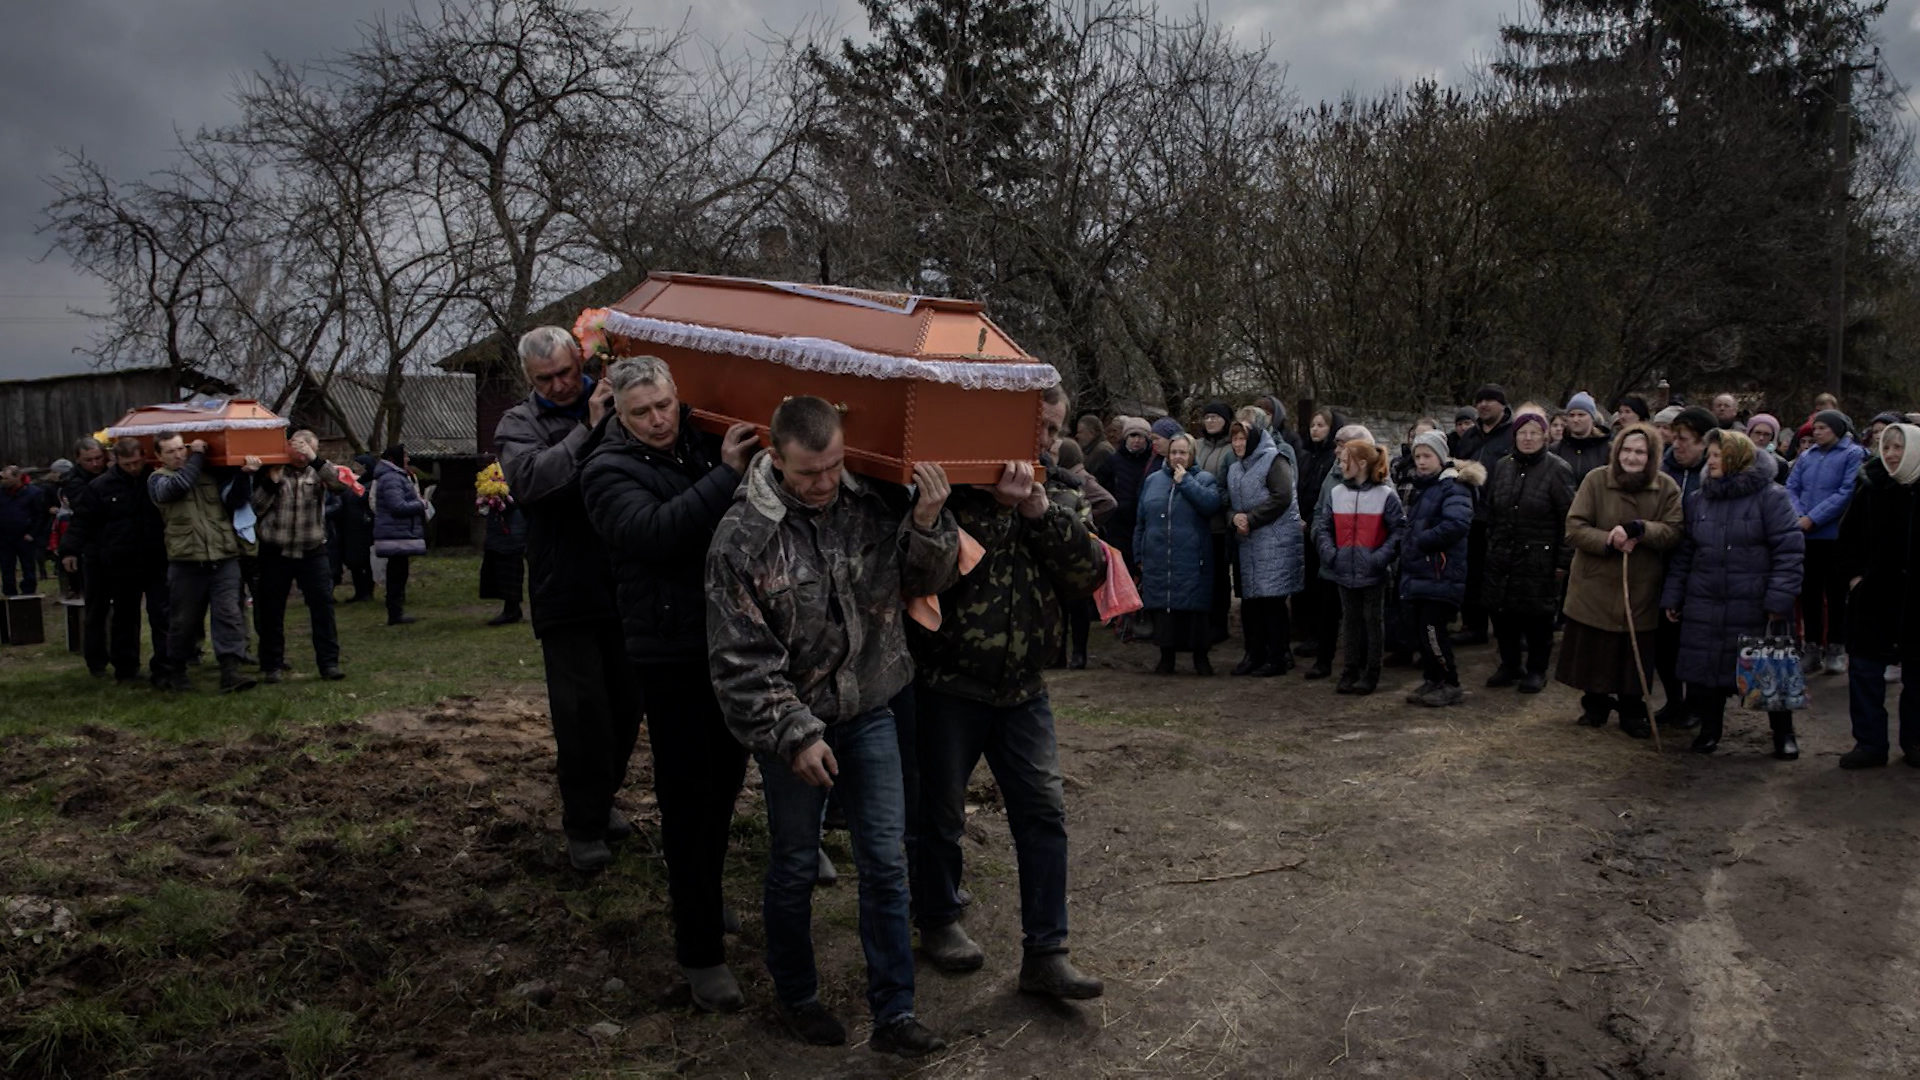 Four pallbearers are carrying a coffin noting the horrors of Russian War Crimes in Ukraine.